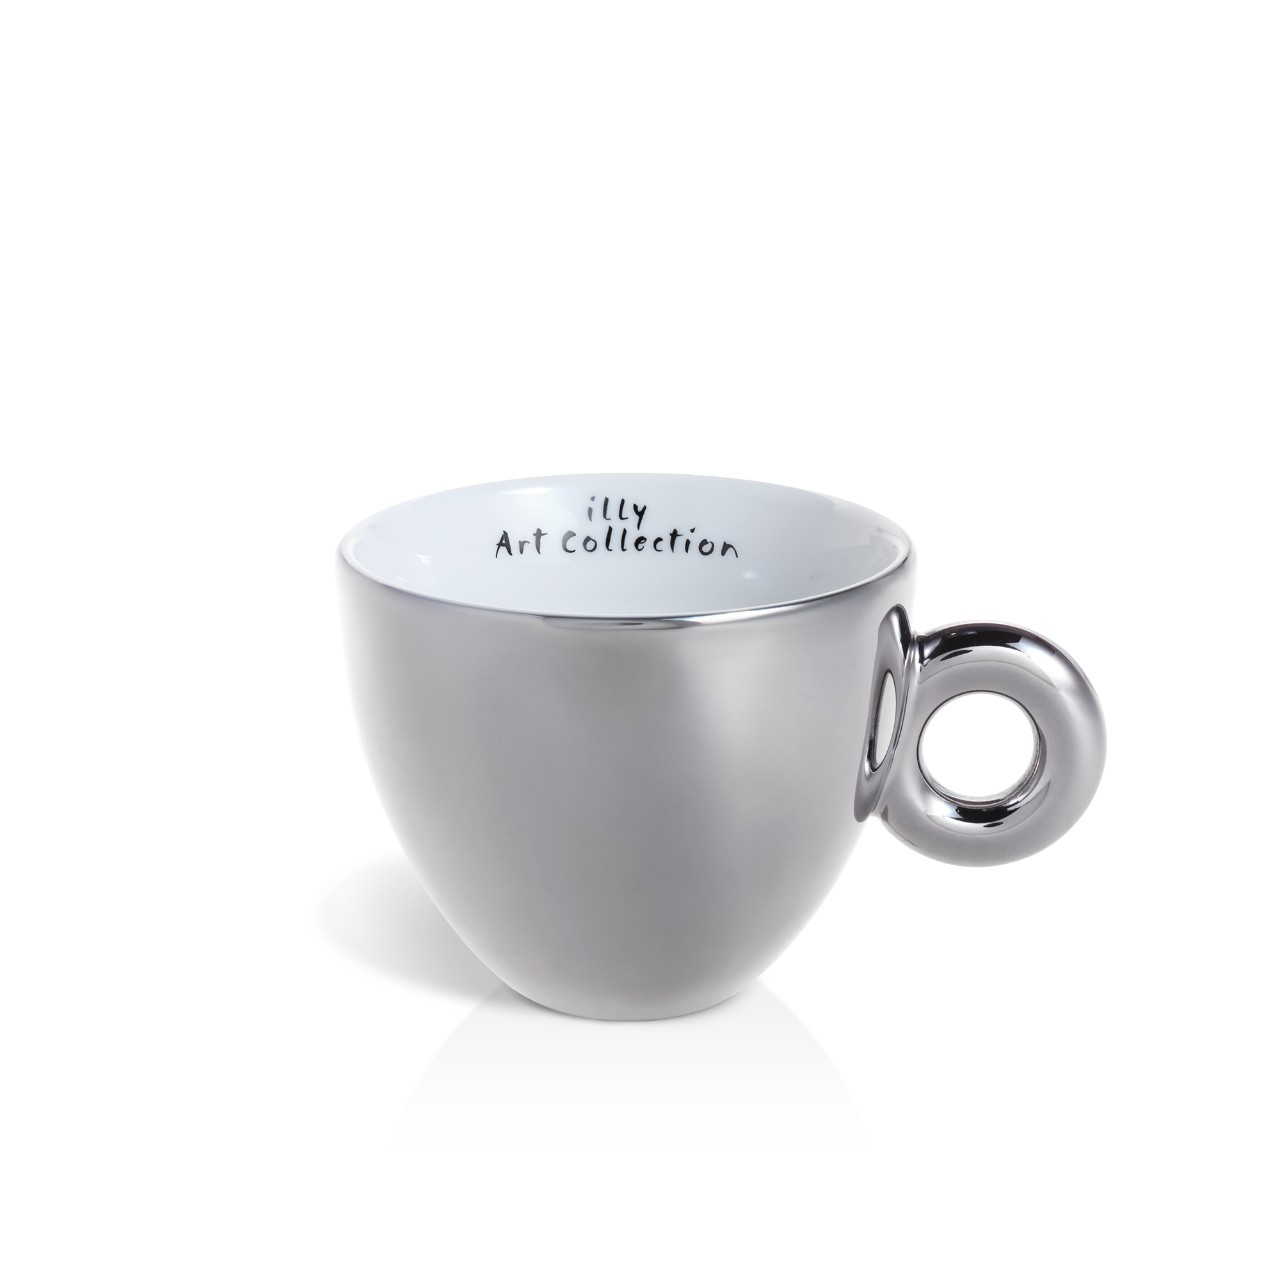 Sagmeister Cappuccino Cups - Set of 2 Cups